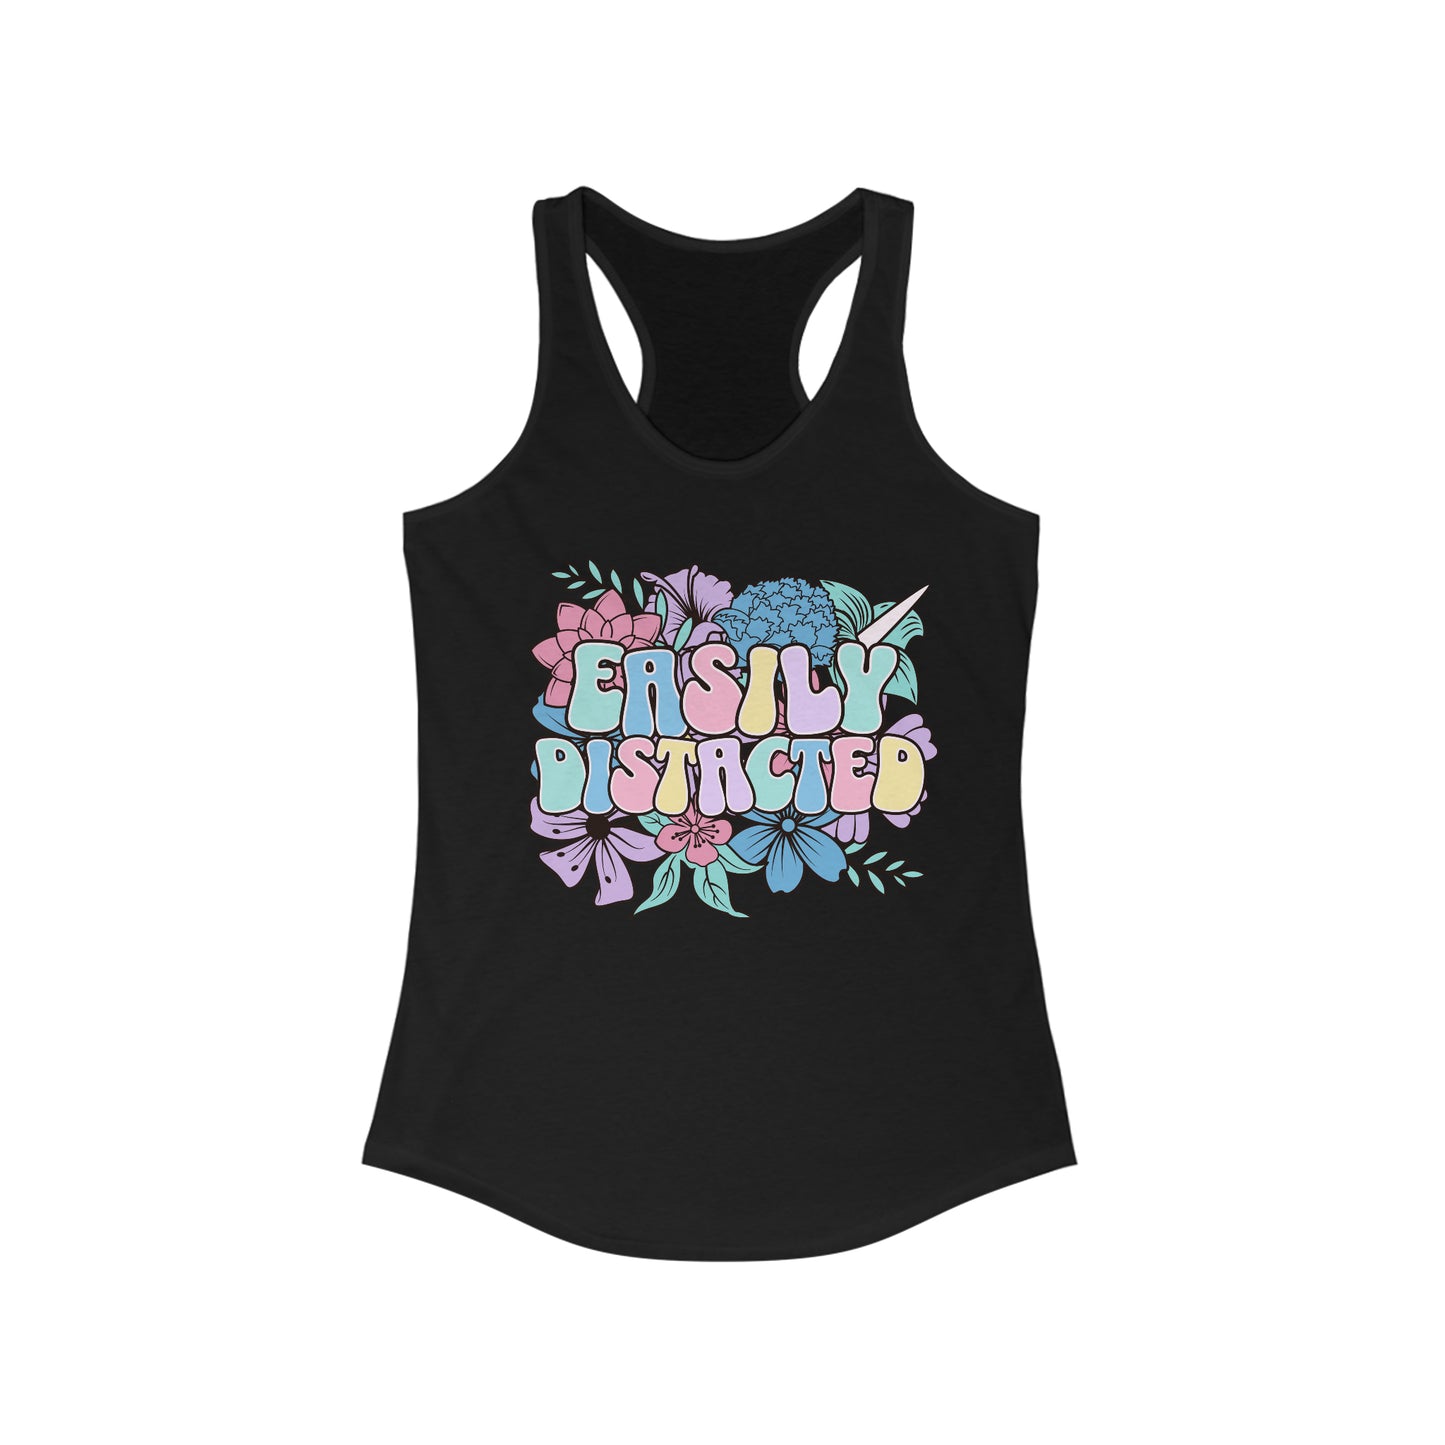 Easily Distracted - Women's Ideal Racerback Tank